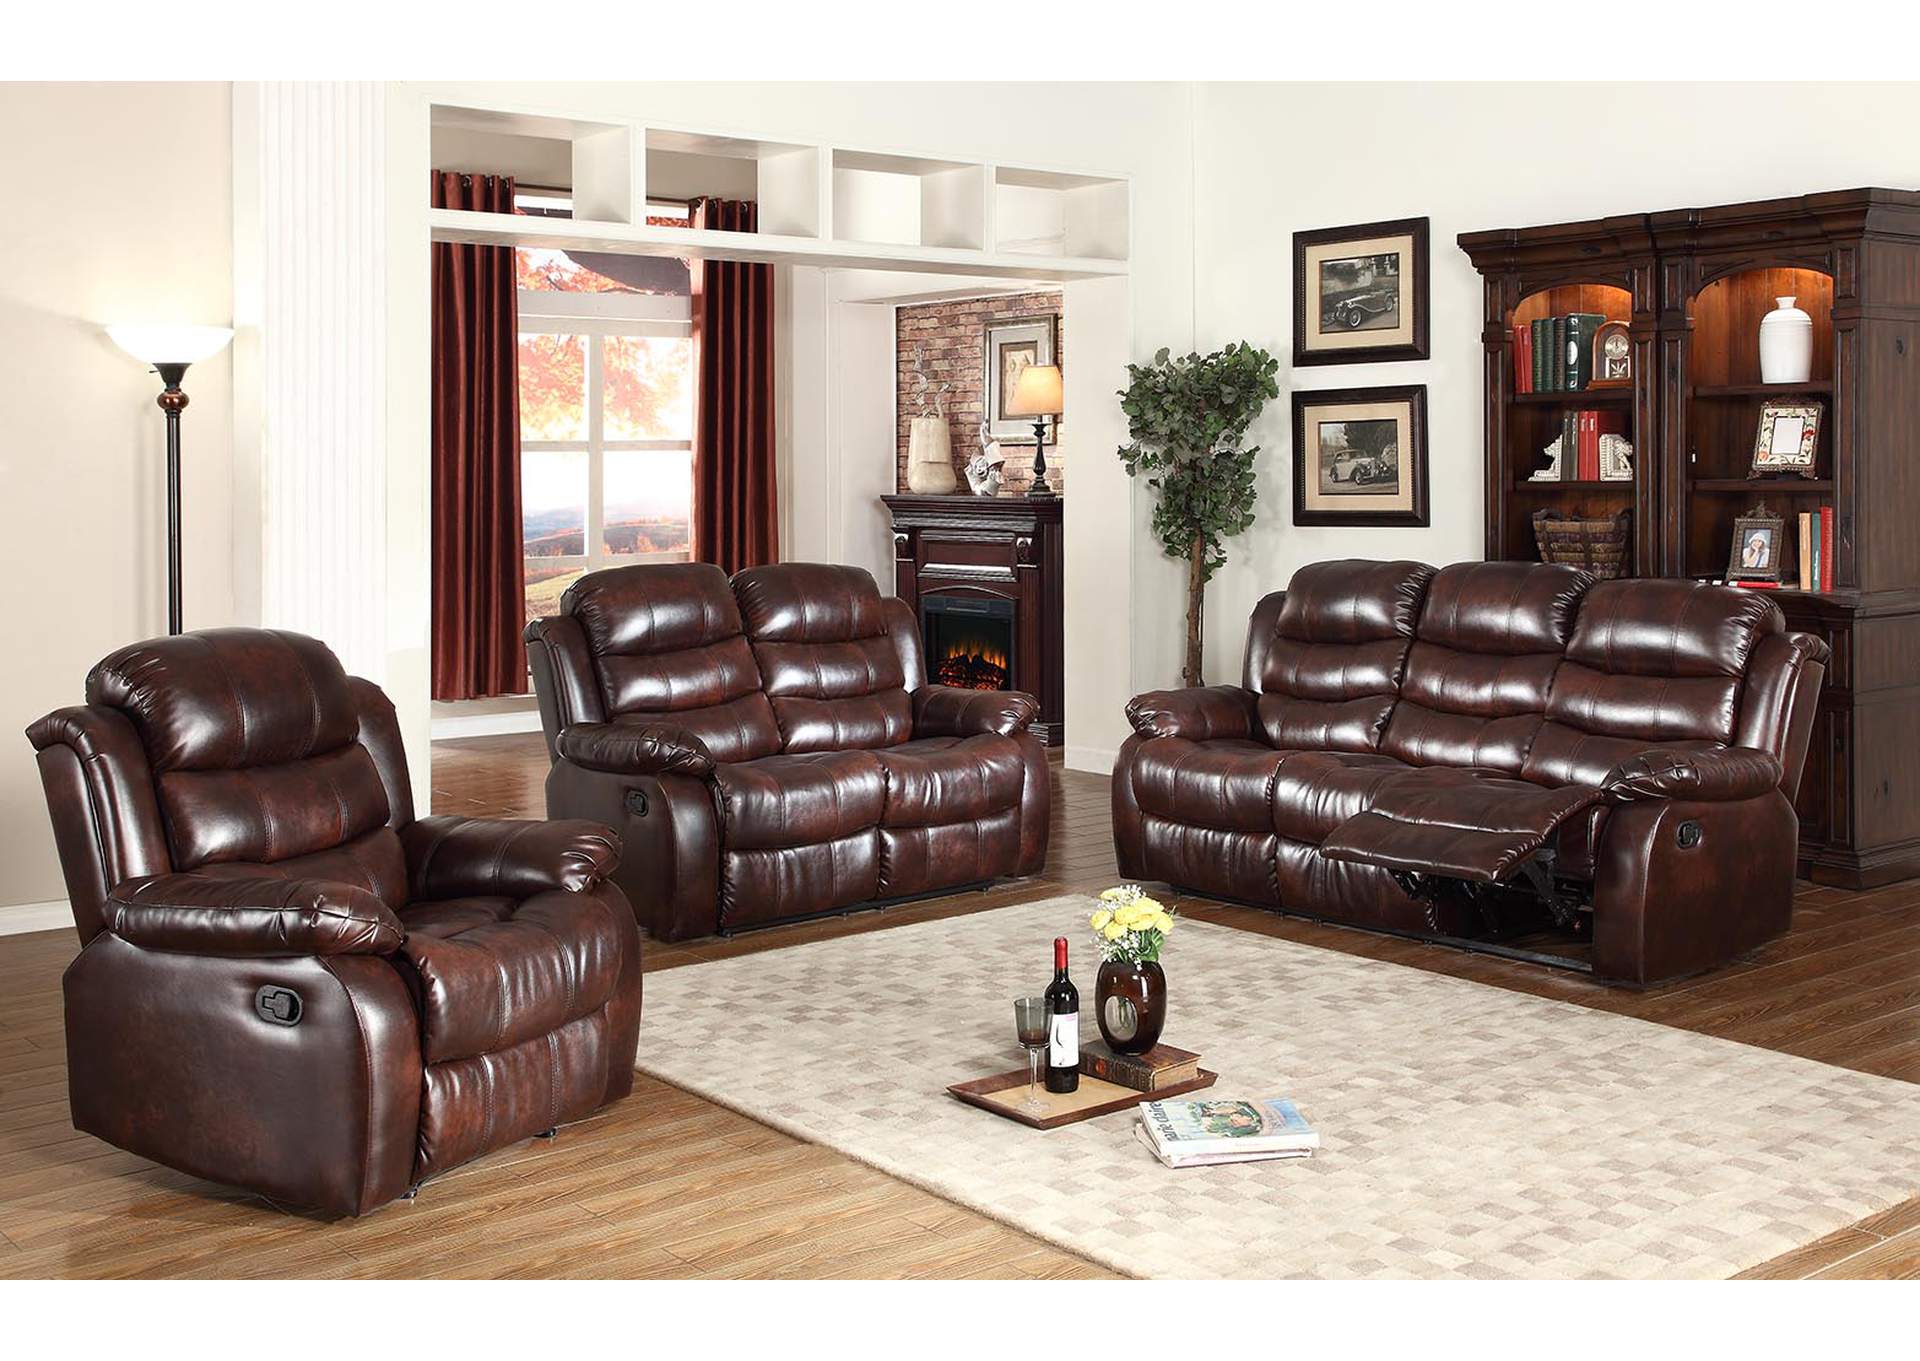 U9500 Brown Faux Leather Recliner,Global Trading